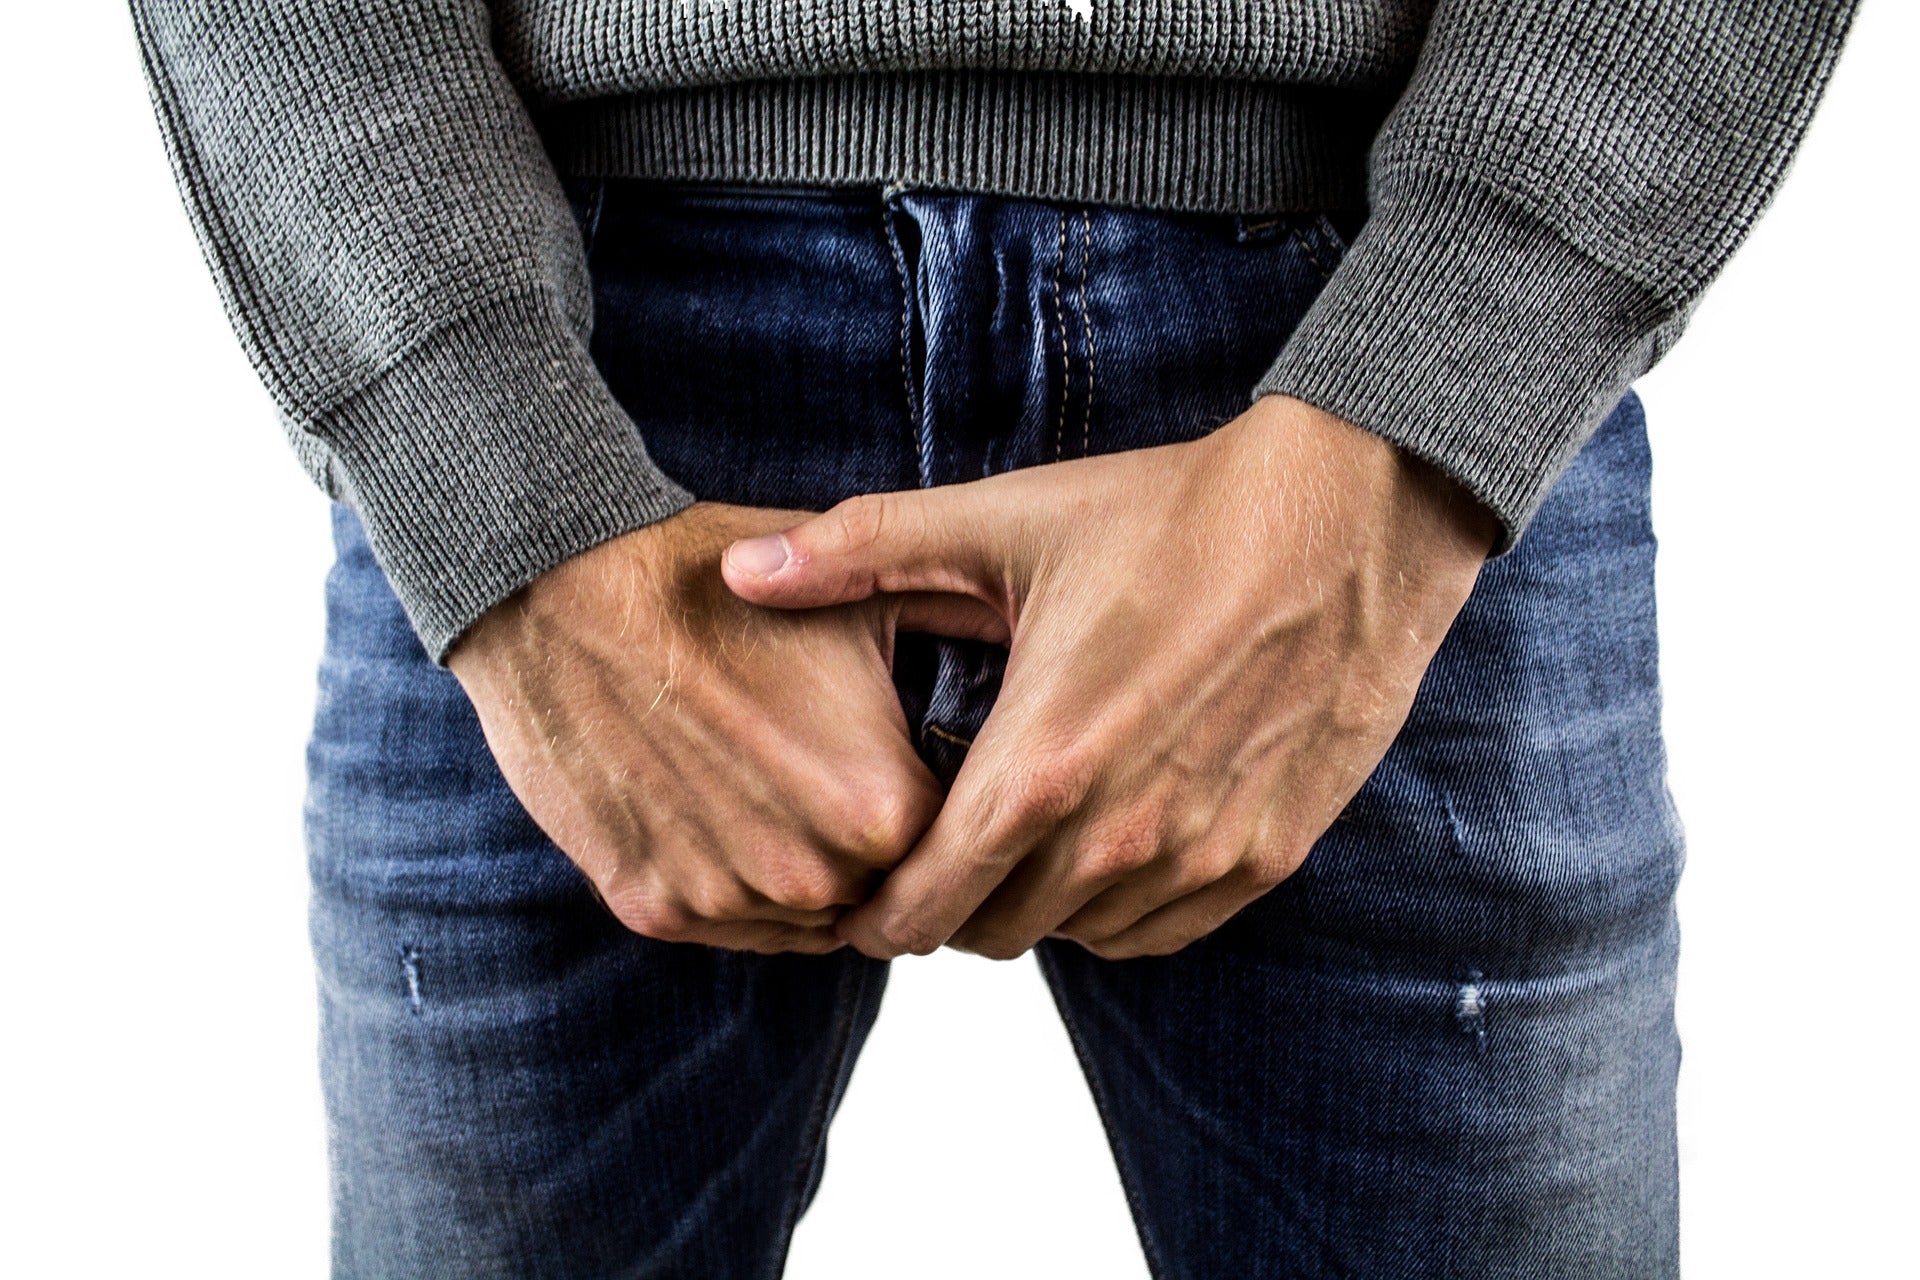 Erection problems - who typically has it?